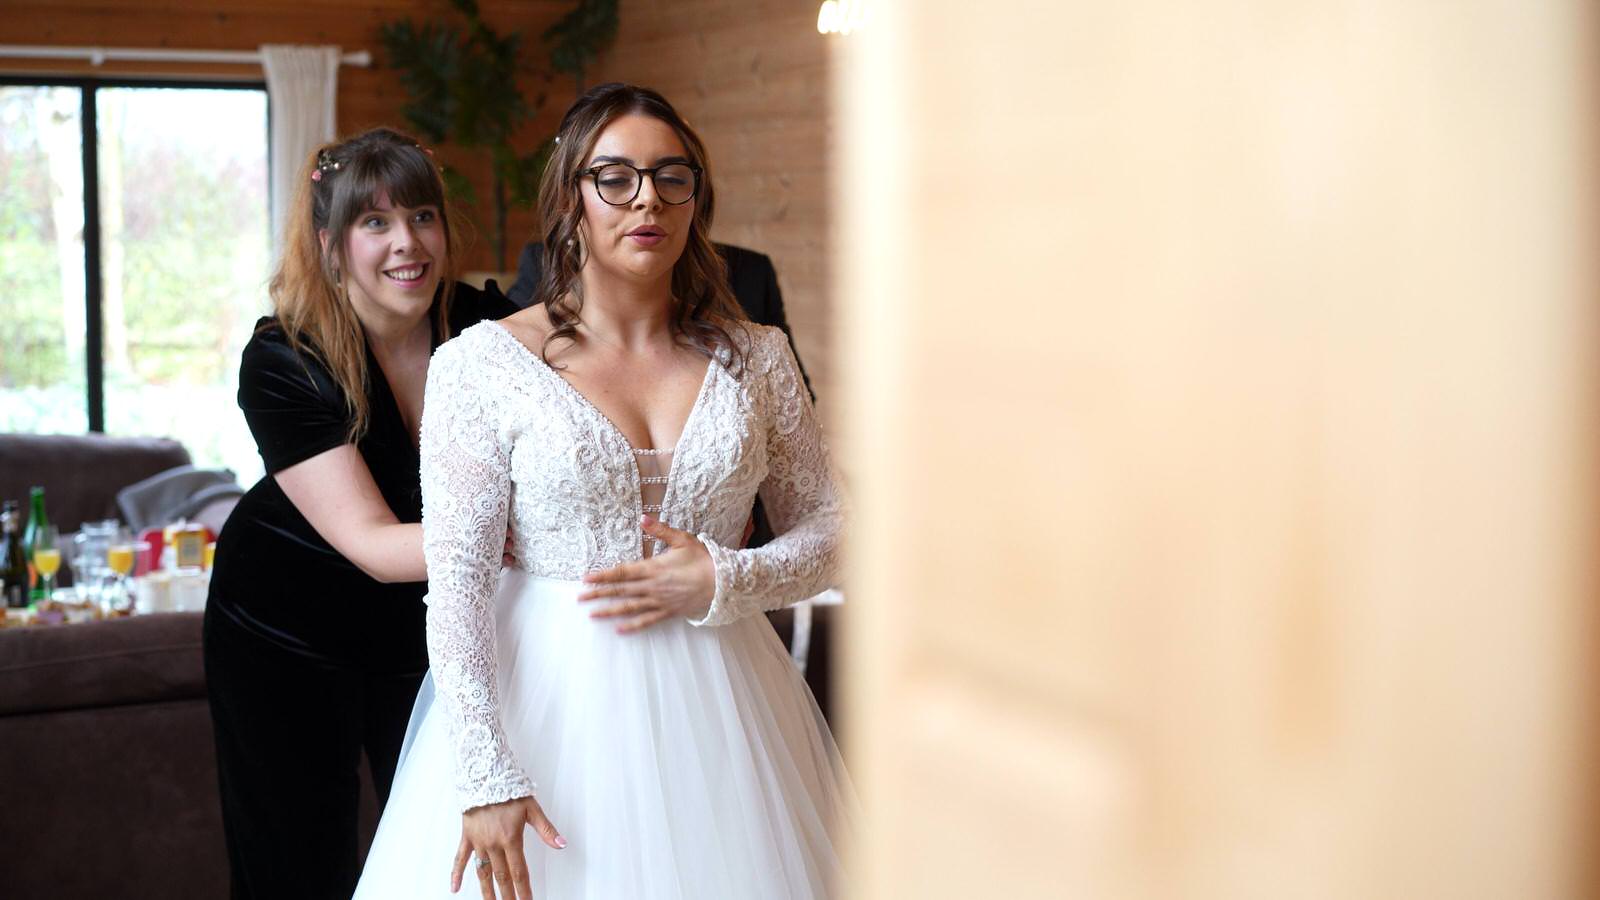 nervous bride takes deep breath getting ready